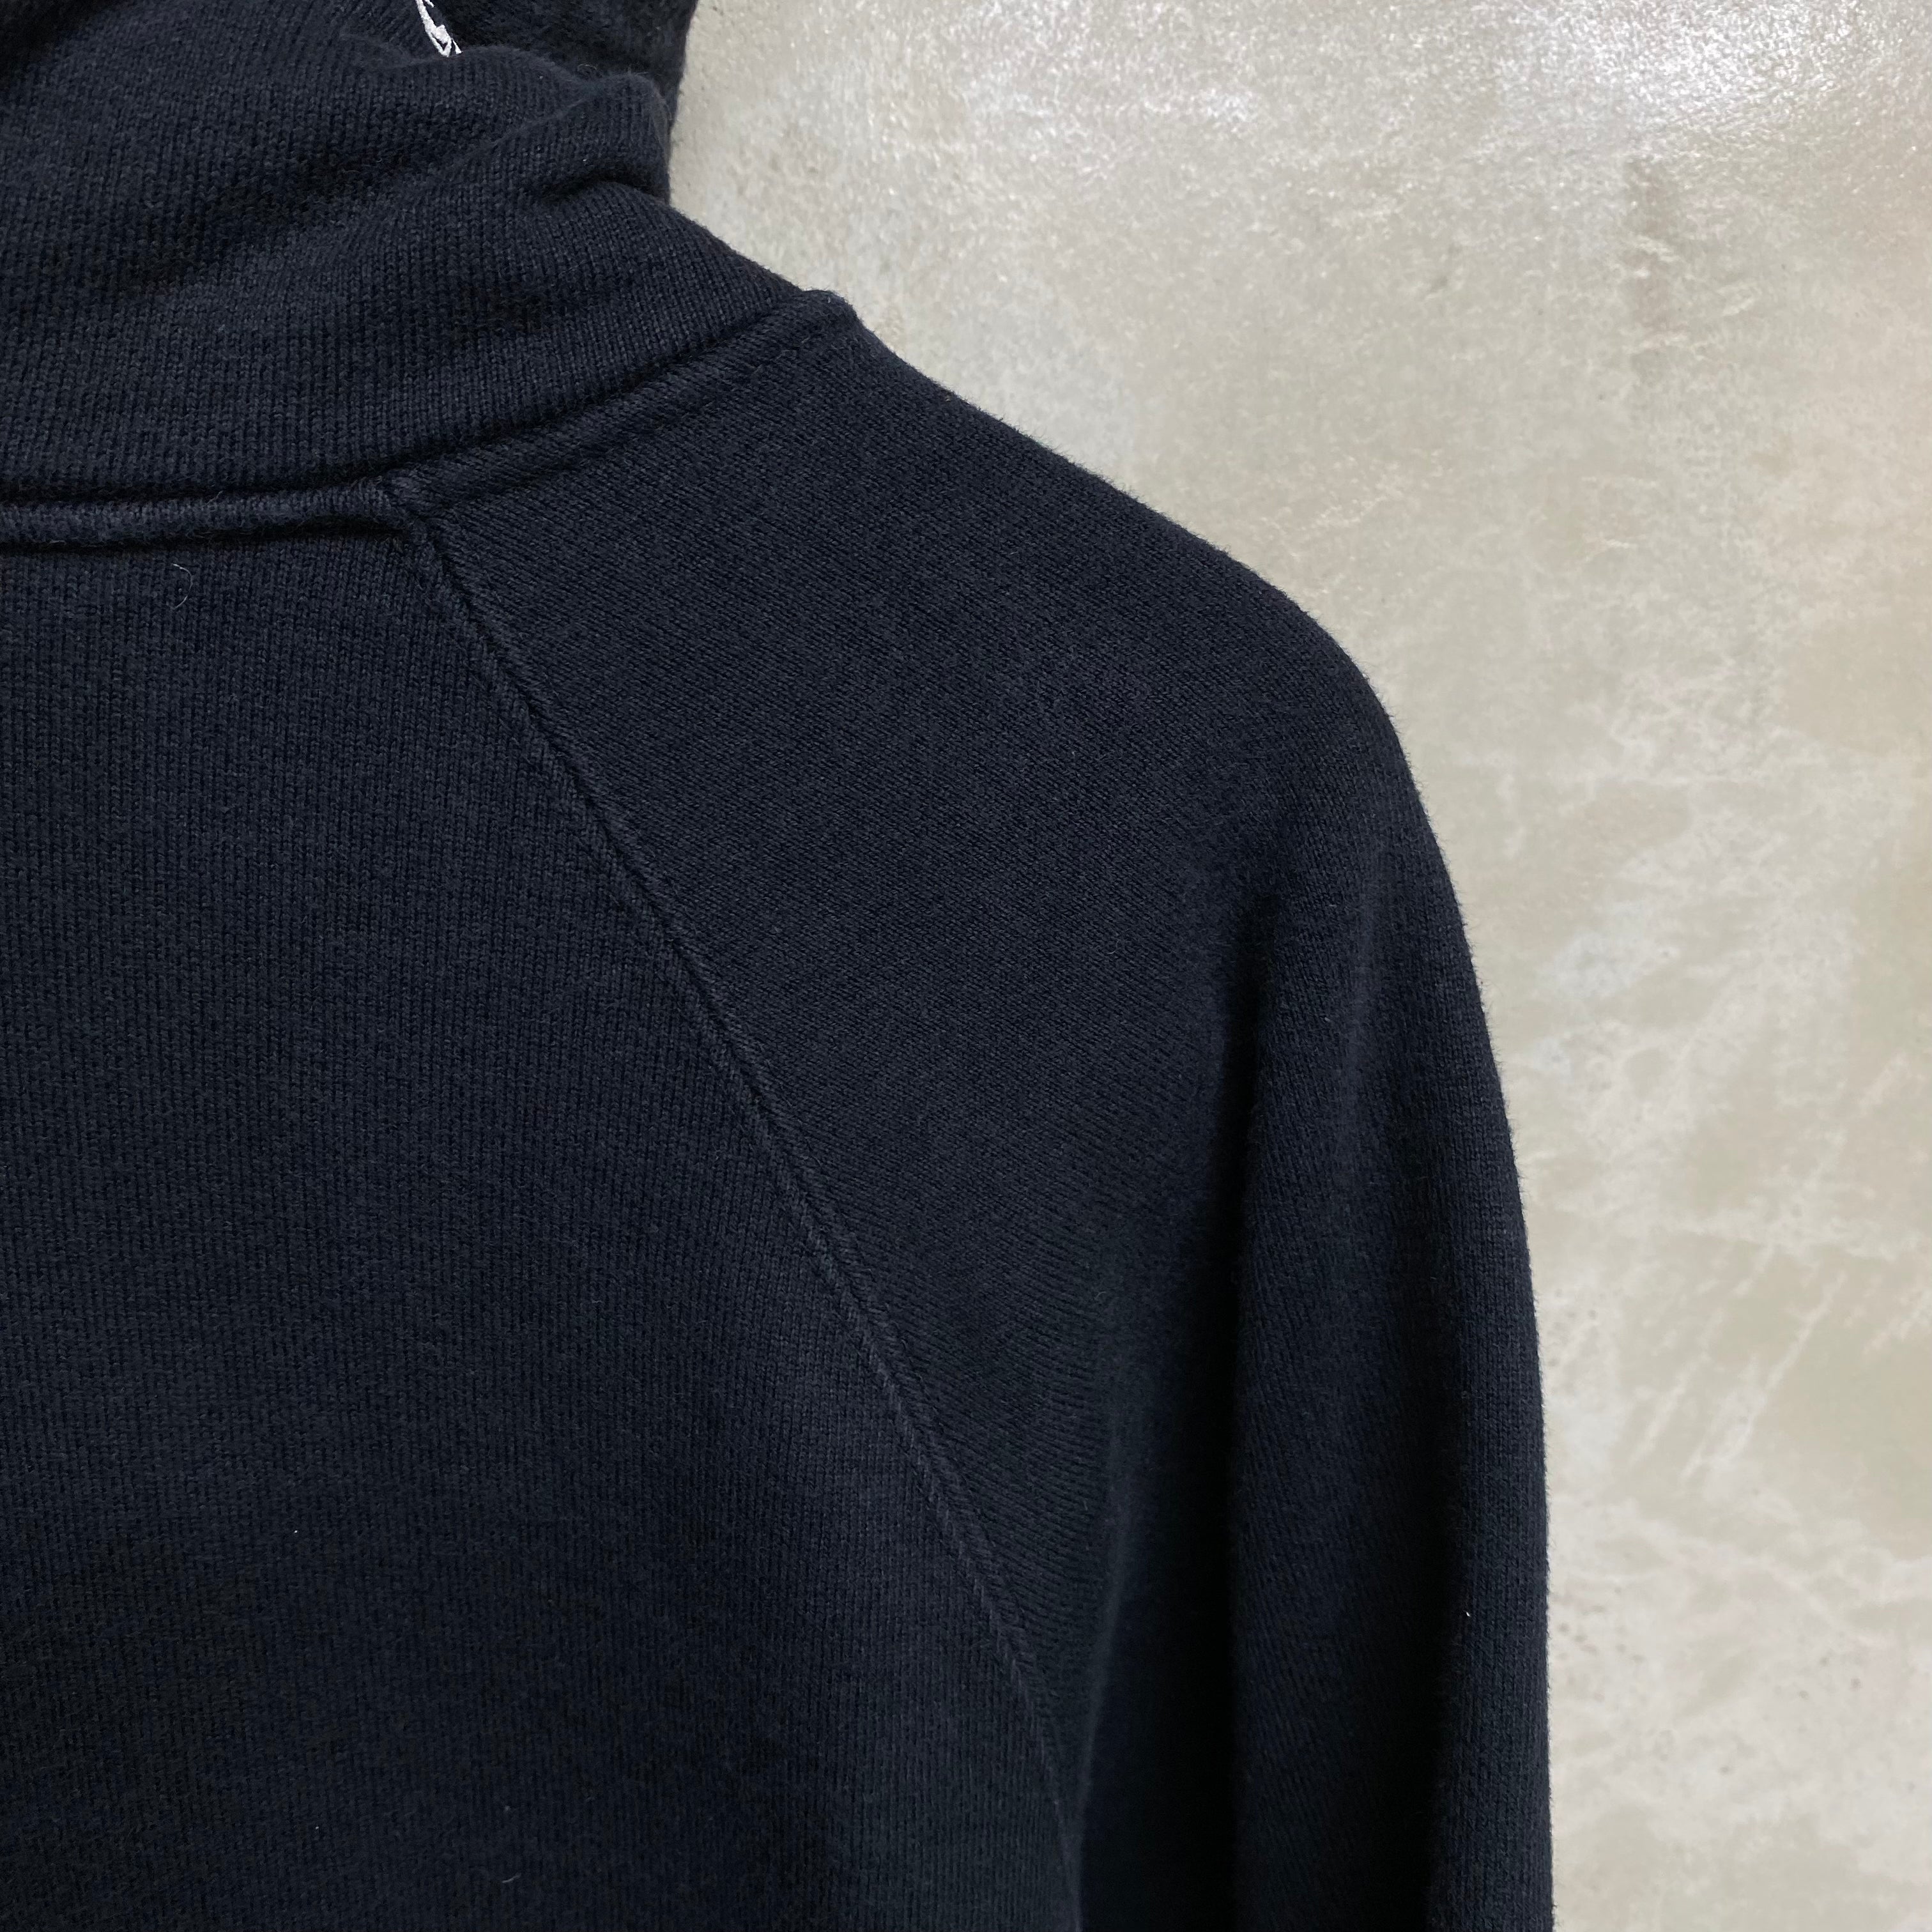 [ ONLY ONE ! ] BOUNTY HUNTER  PULL OVER HOODIE  / ARCHIVE